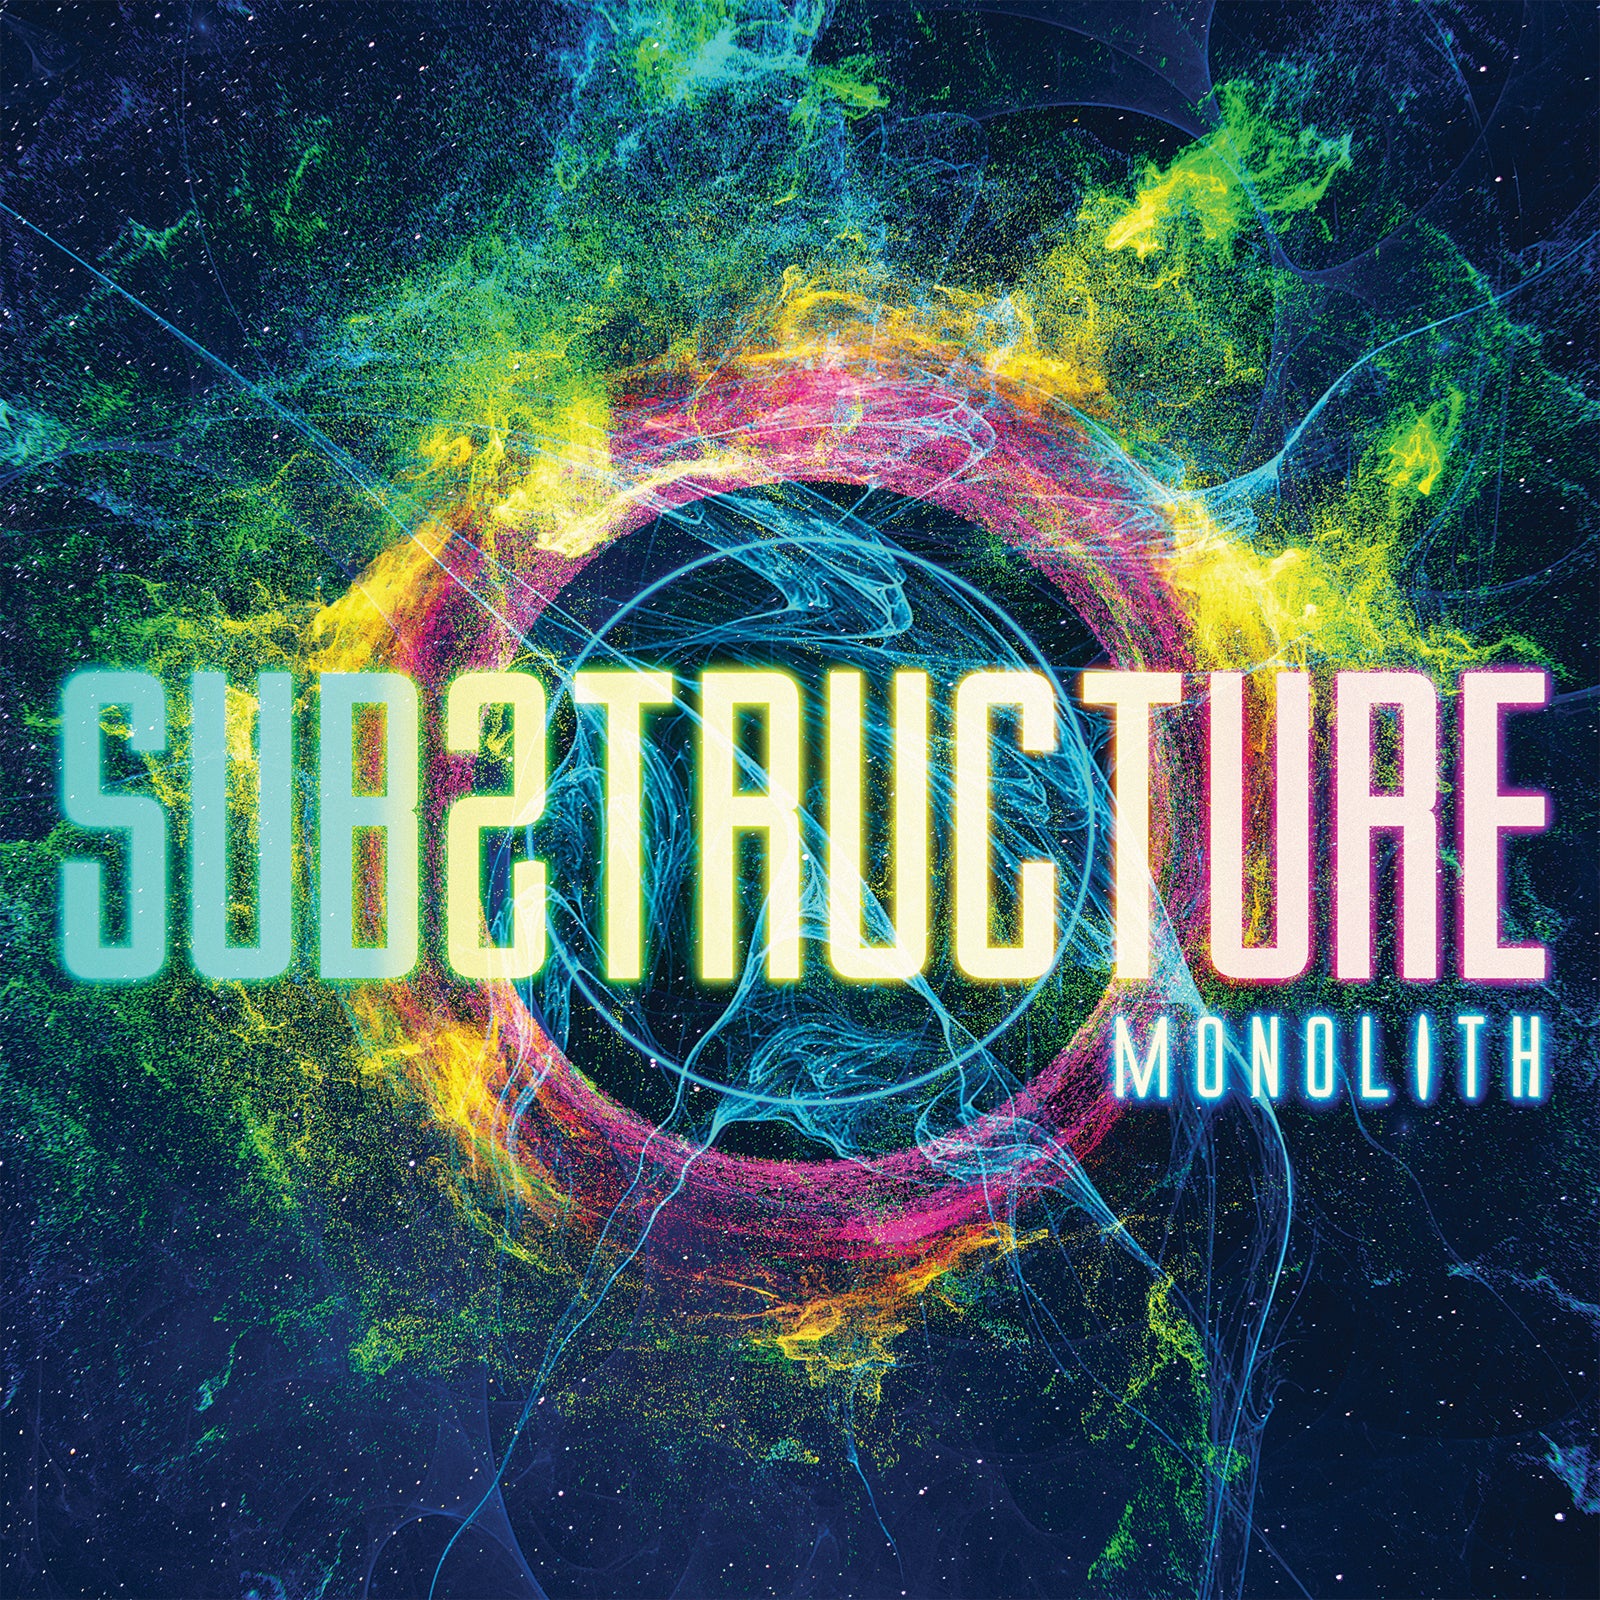 Substructure - Monolith